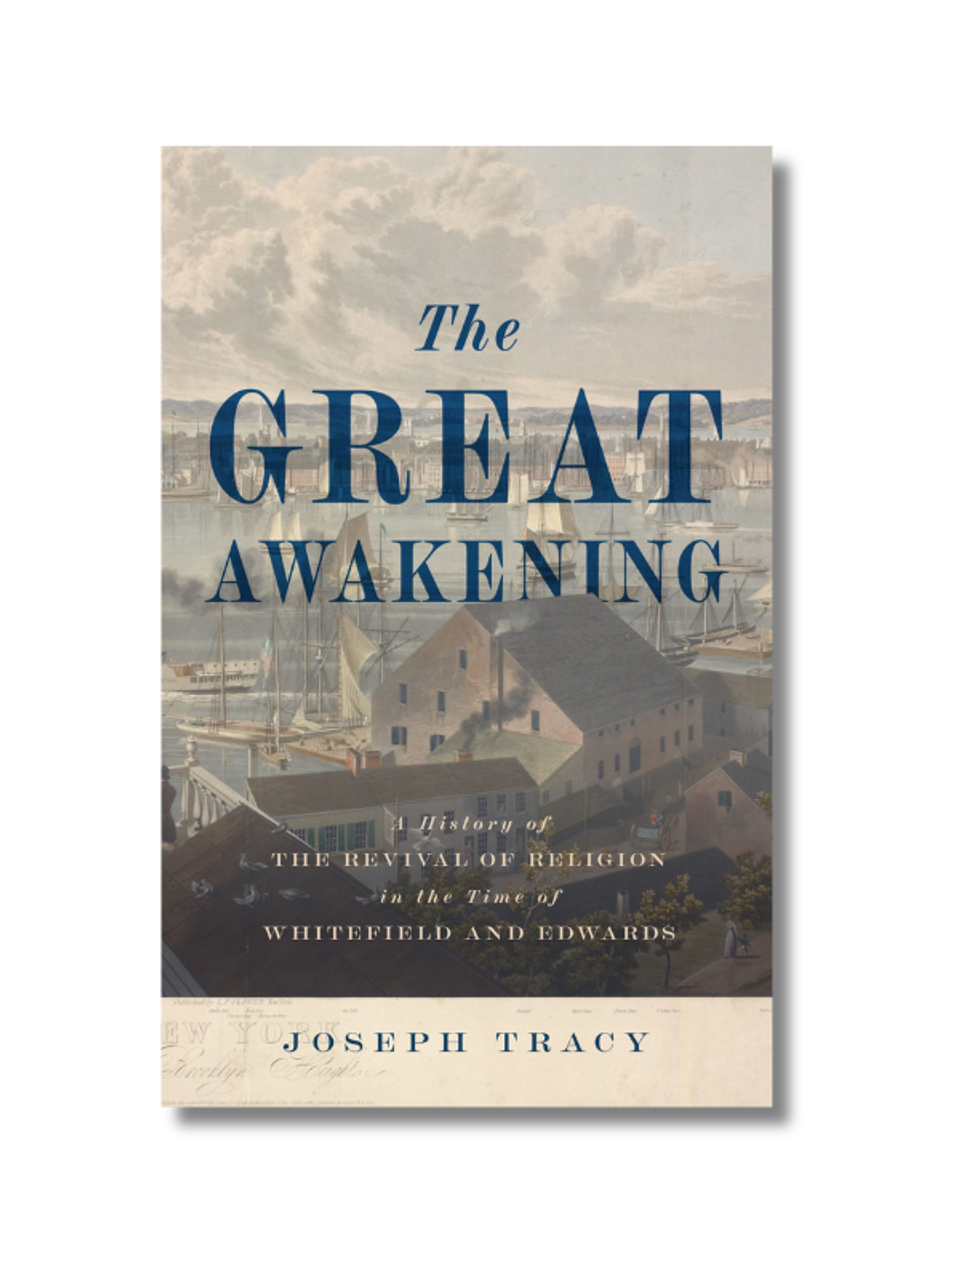 The Great Awakening: A History of the Revival of Religion in the Time of Whitefield and Edwards (Paperback)